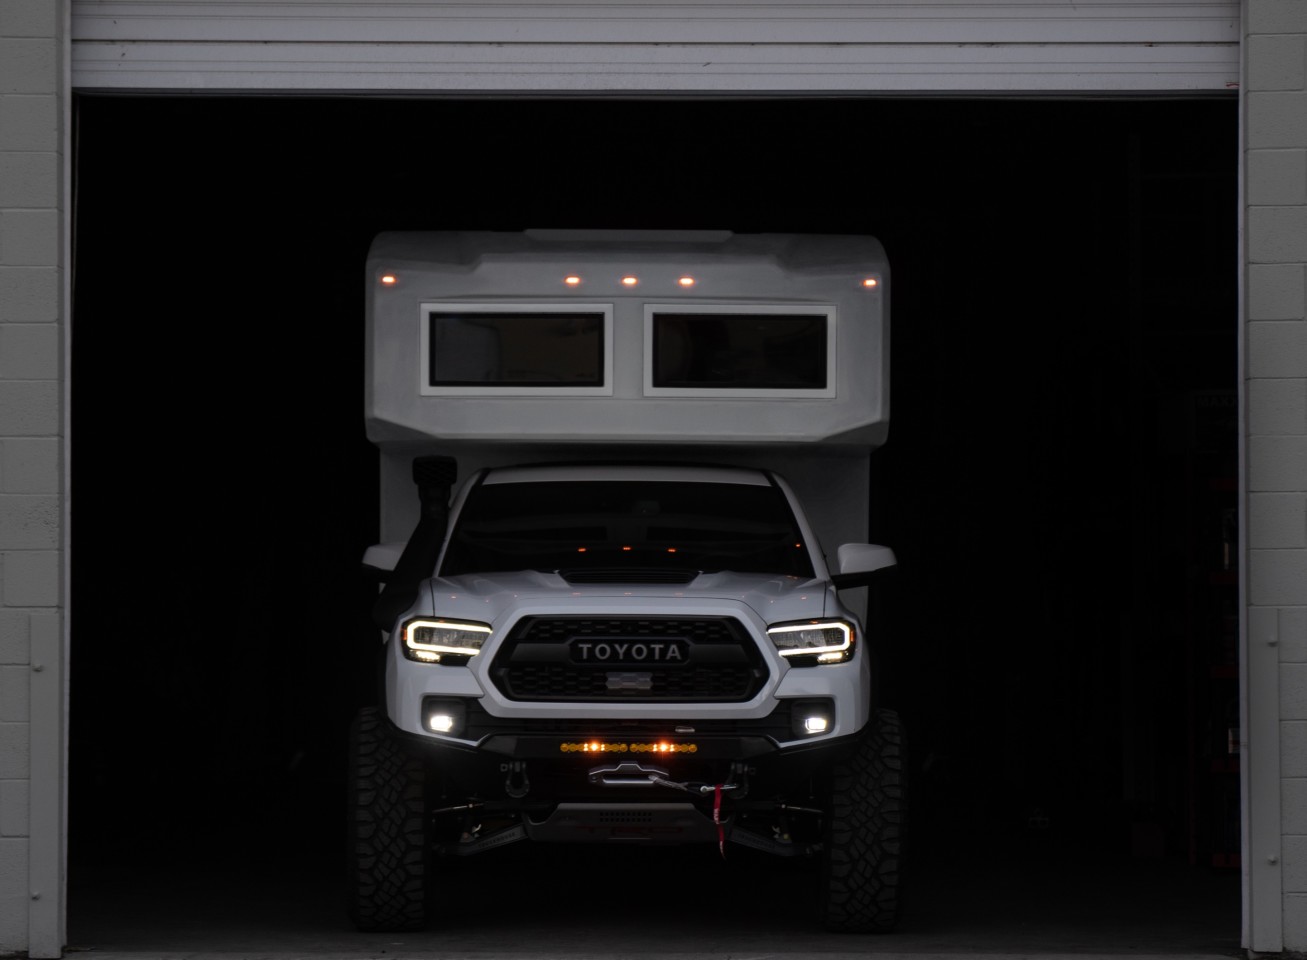 The TruckHouse BCT emerges this week as a compact, go-anywhere expedition vehicle based on the Toyota Tacoma